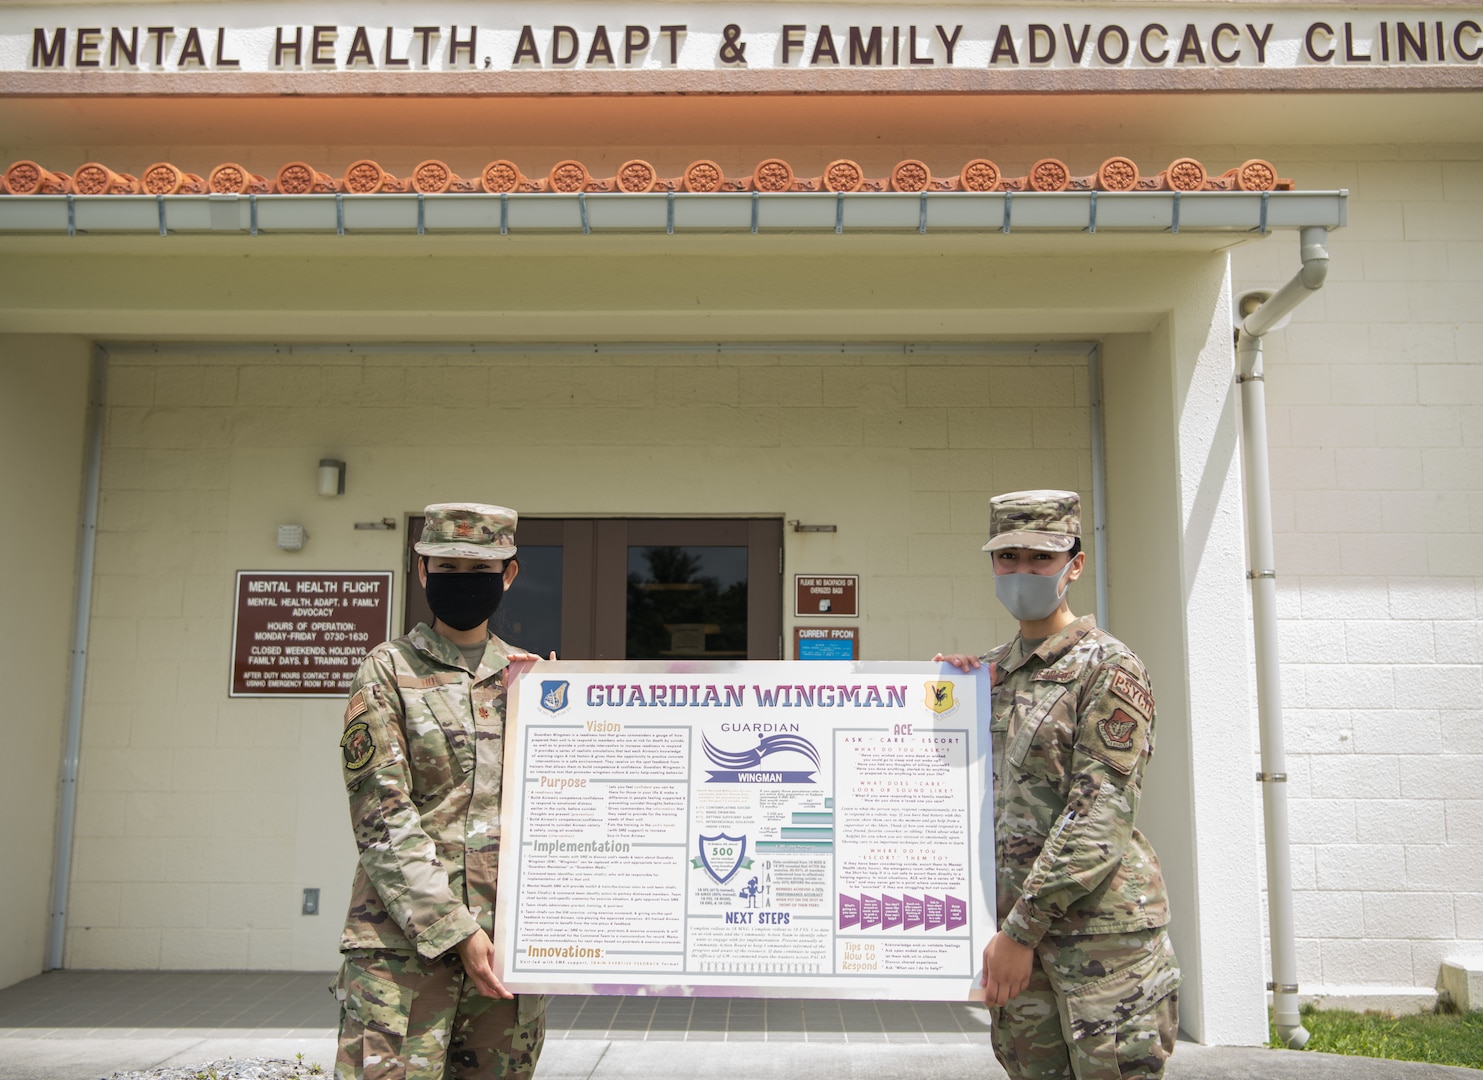 Guardian Wingman, a suicide prevention training program designed by a team at the Kadena Mental Health Clinic, aims to improve mental health management by building a community of Airmen equipped with the tools to support their fellow wingmen.